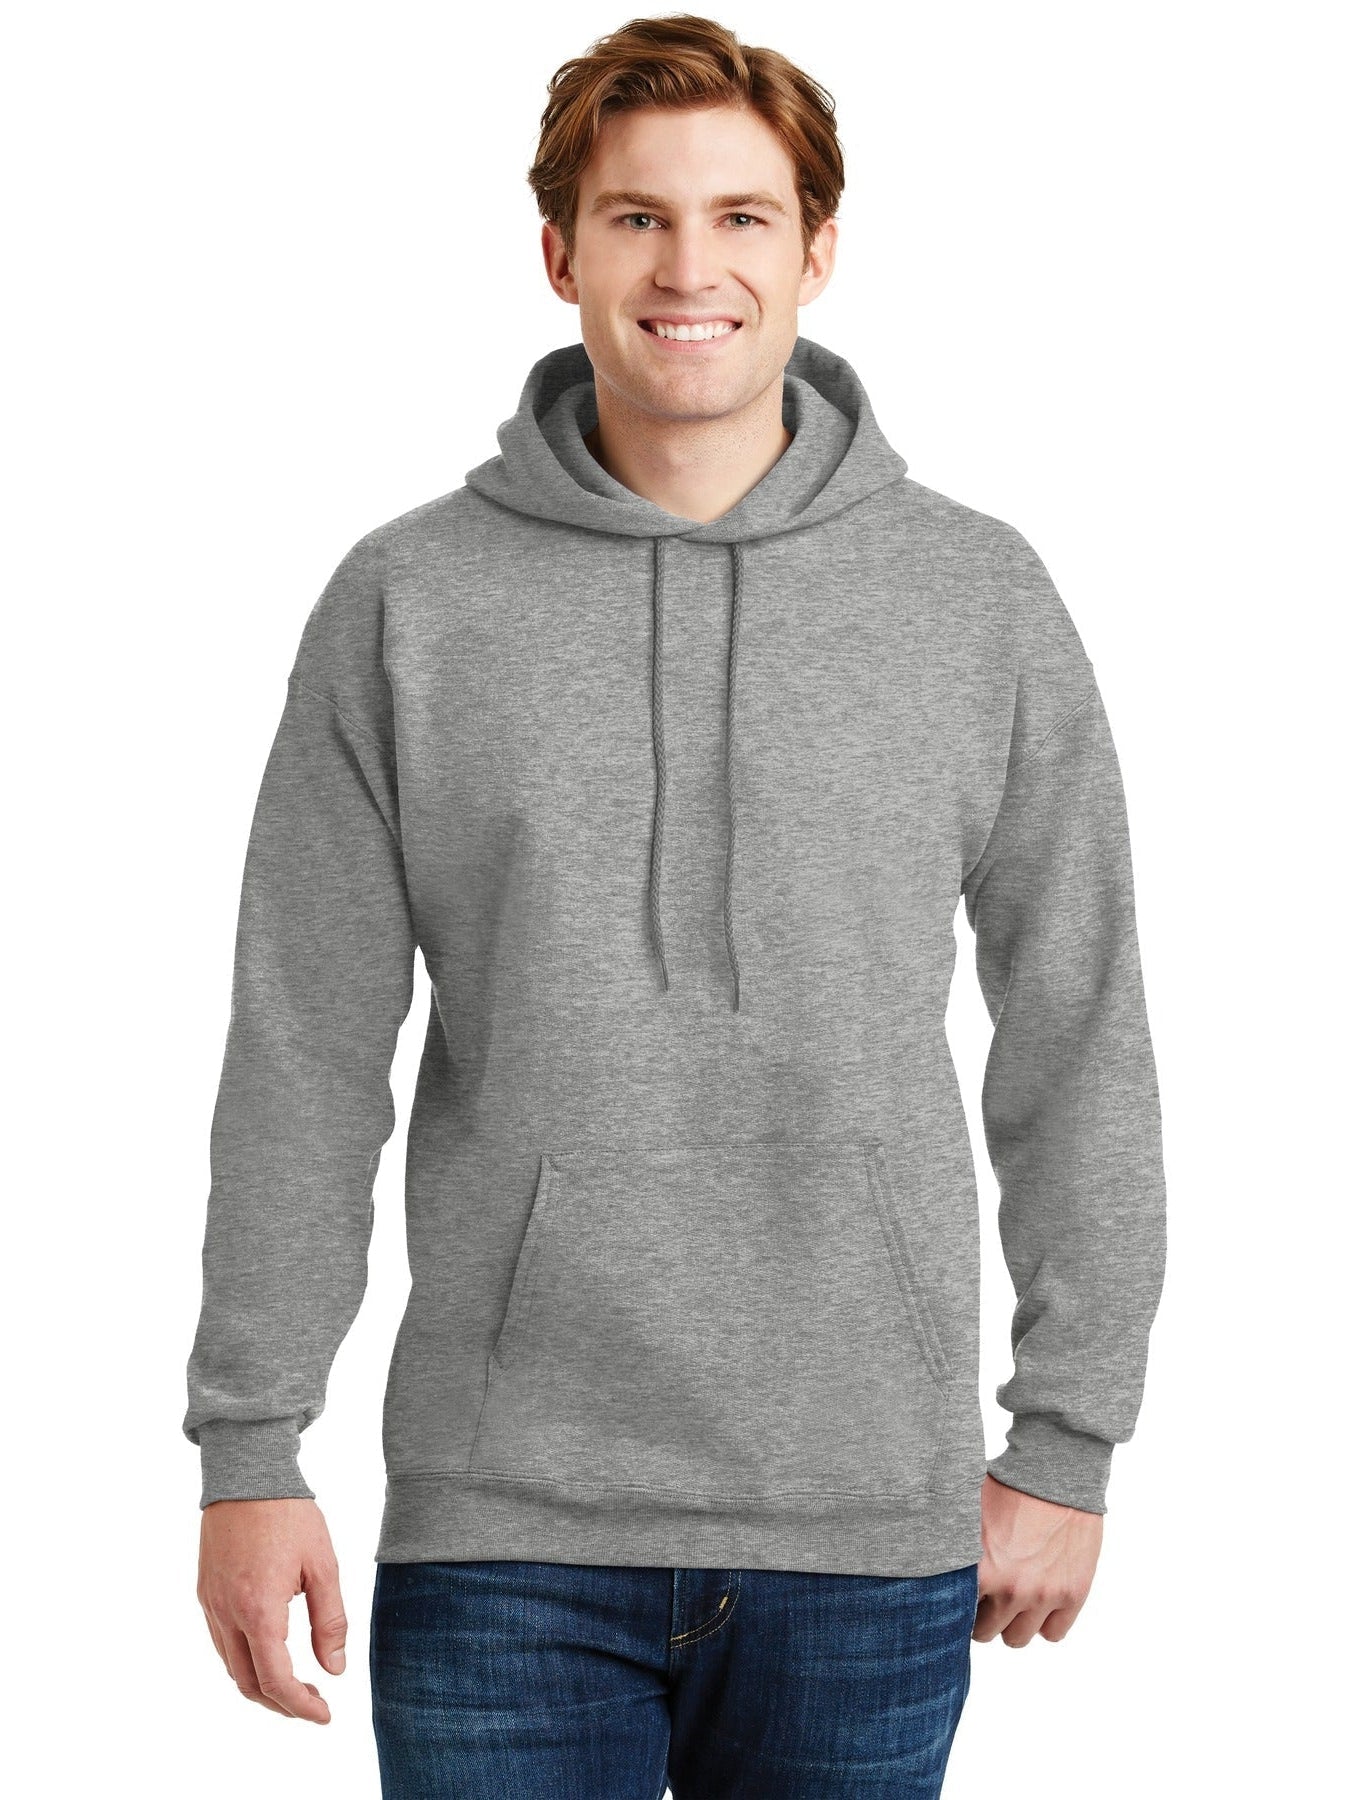 Hanes F170 Hoodie with Custom Embroidery